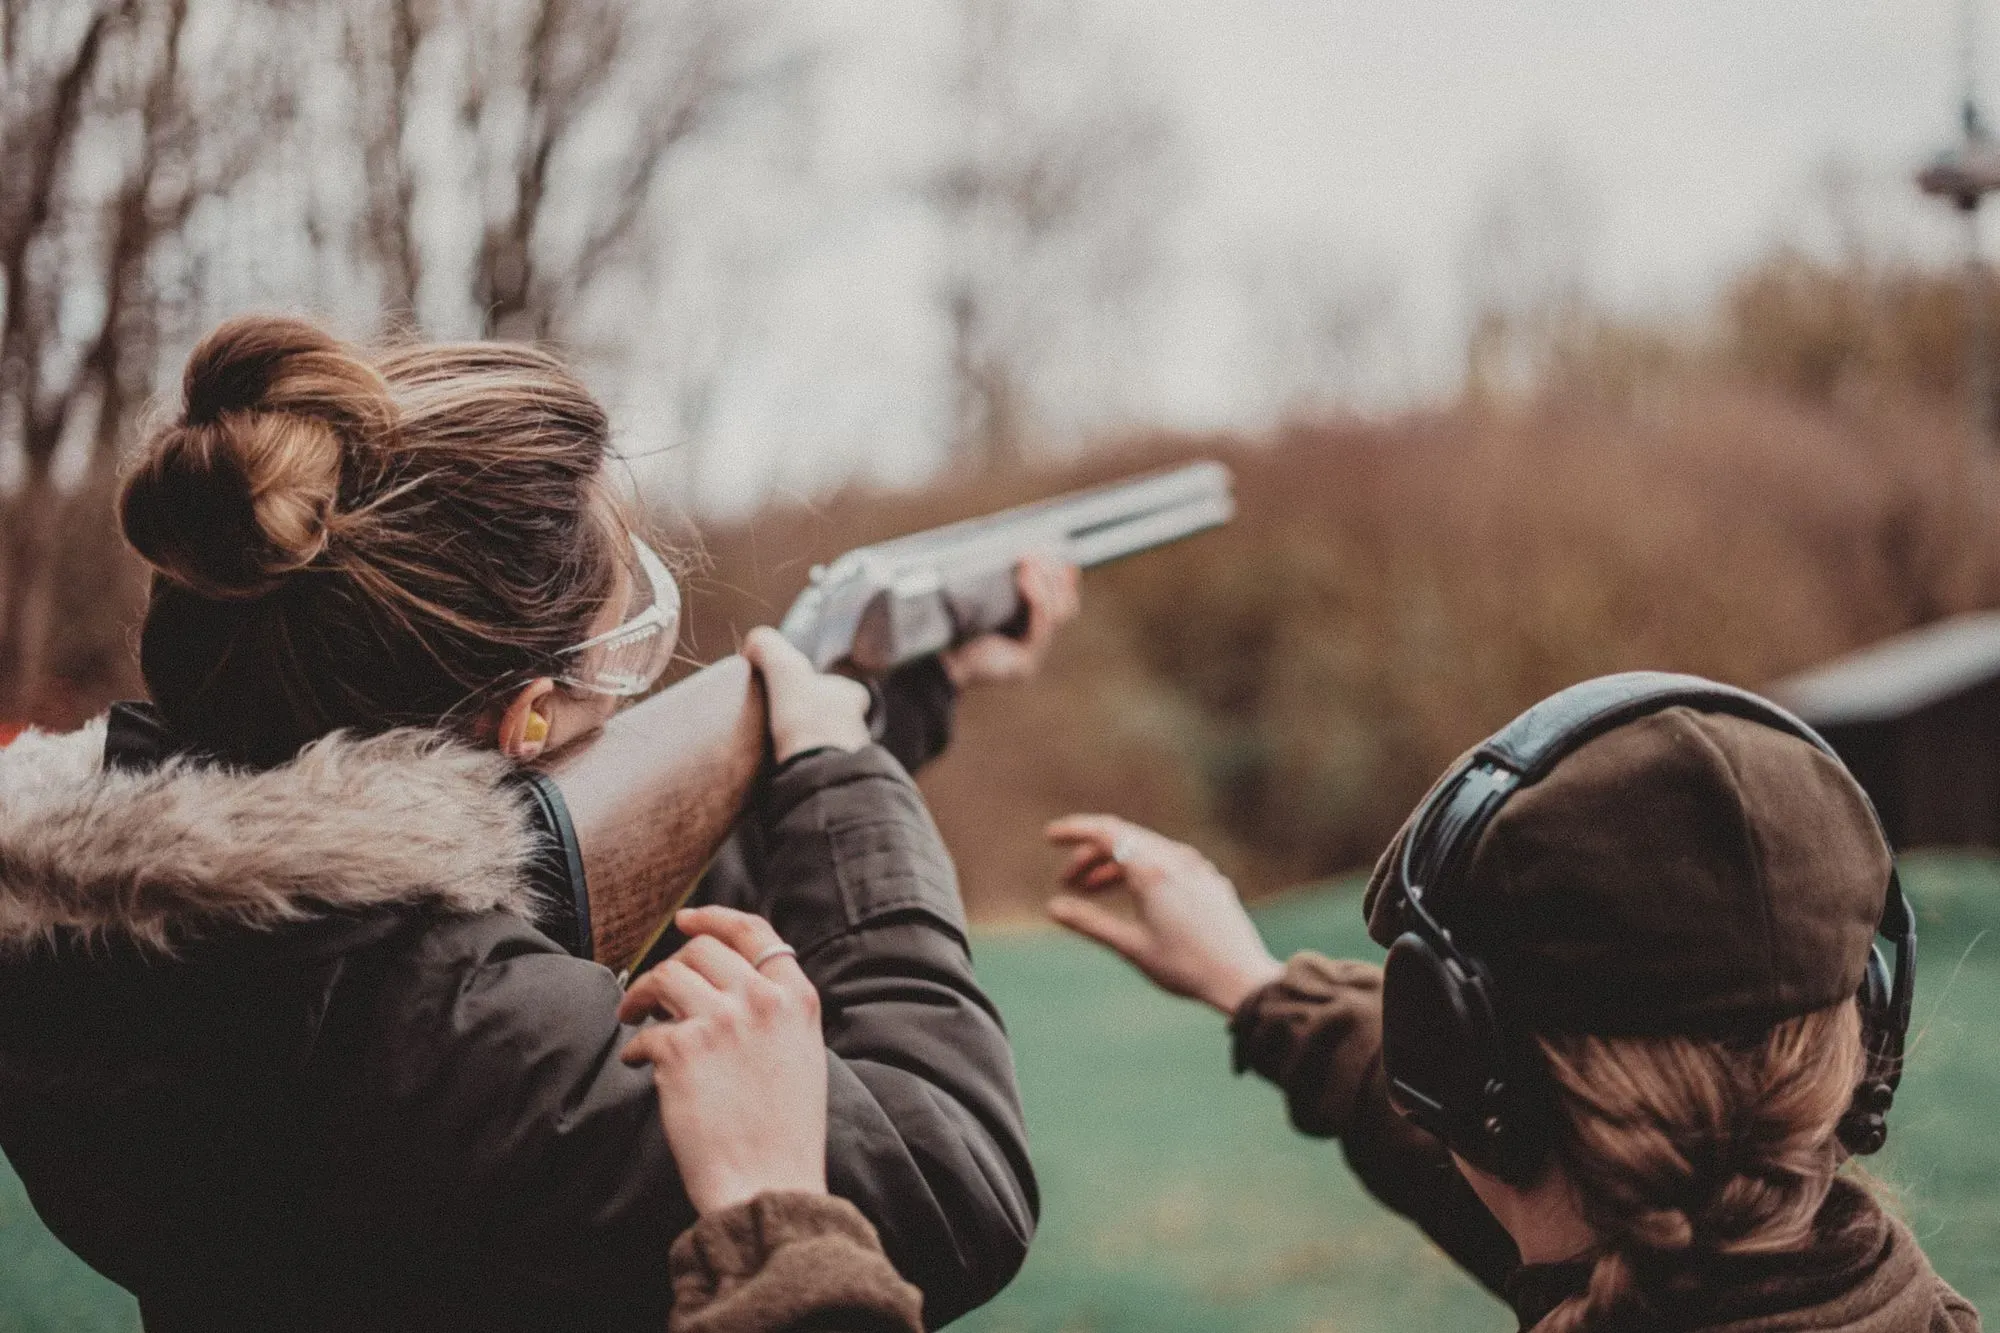 5 Tips on How to Dress Properly at a Shooting Range